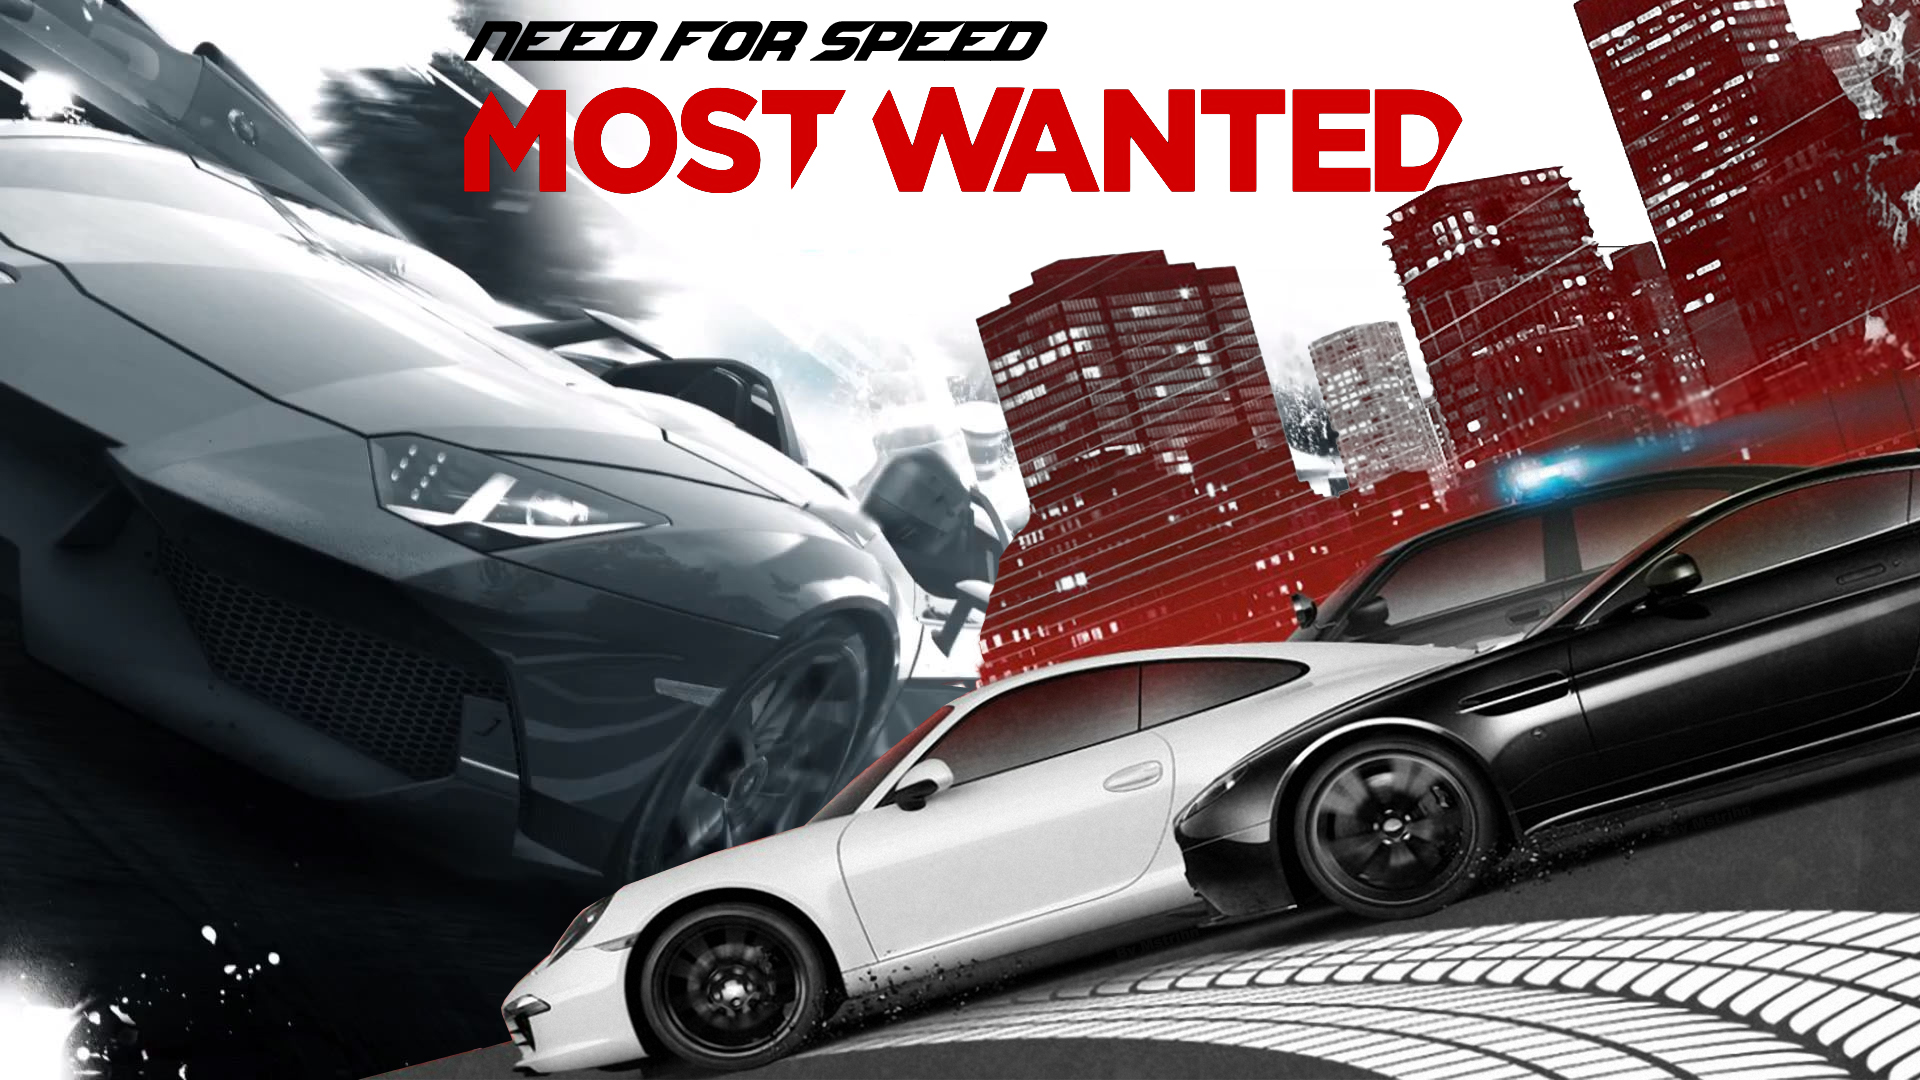 NEED FOR SPEED – MOST WANTED